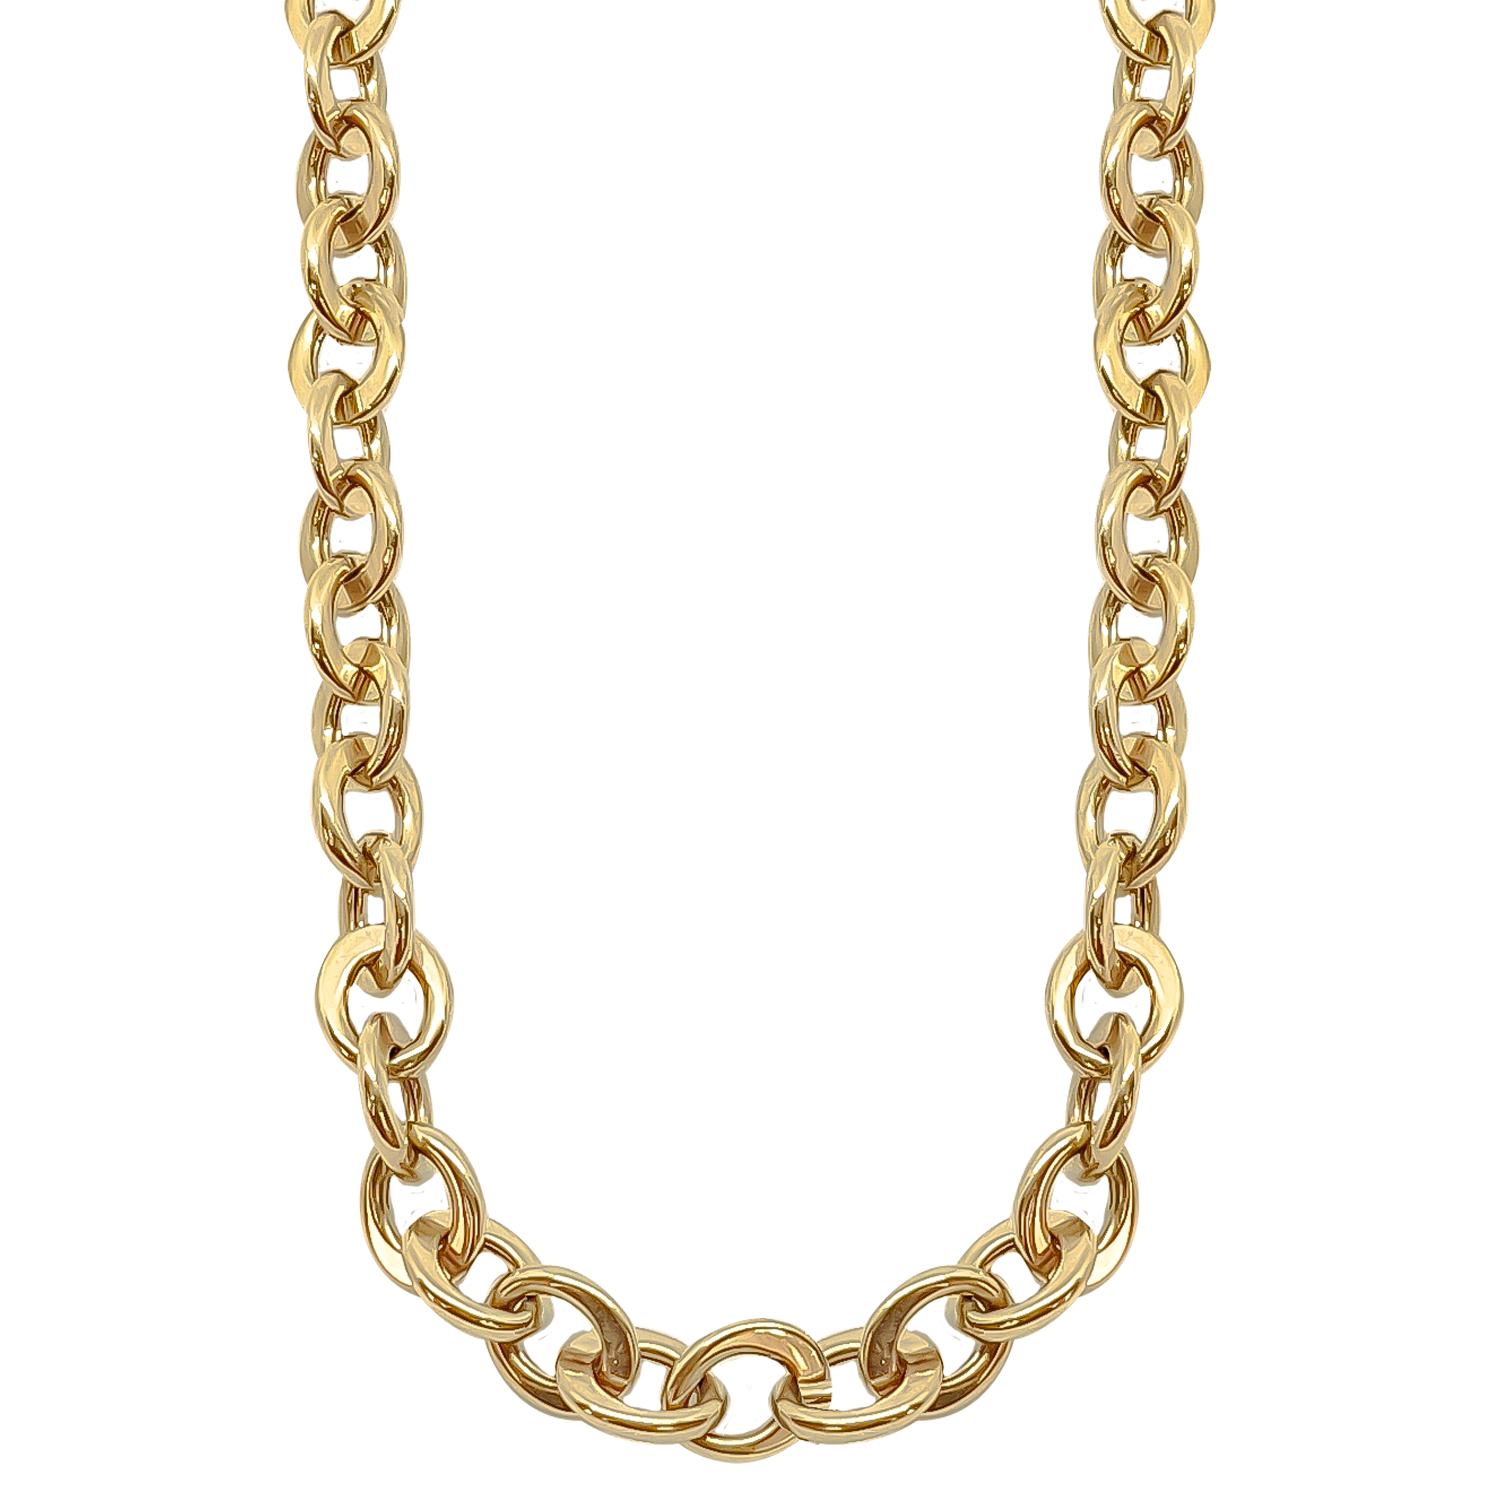 Flat Oval Link chain in 9ct Yellow Gold in hollow tubes for a lighter weight on your shoulders.